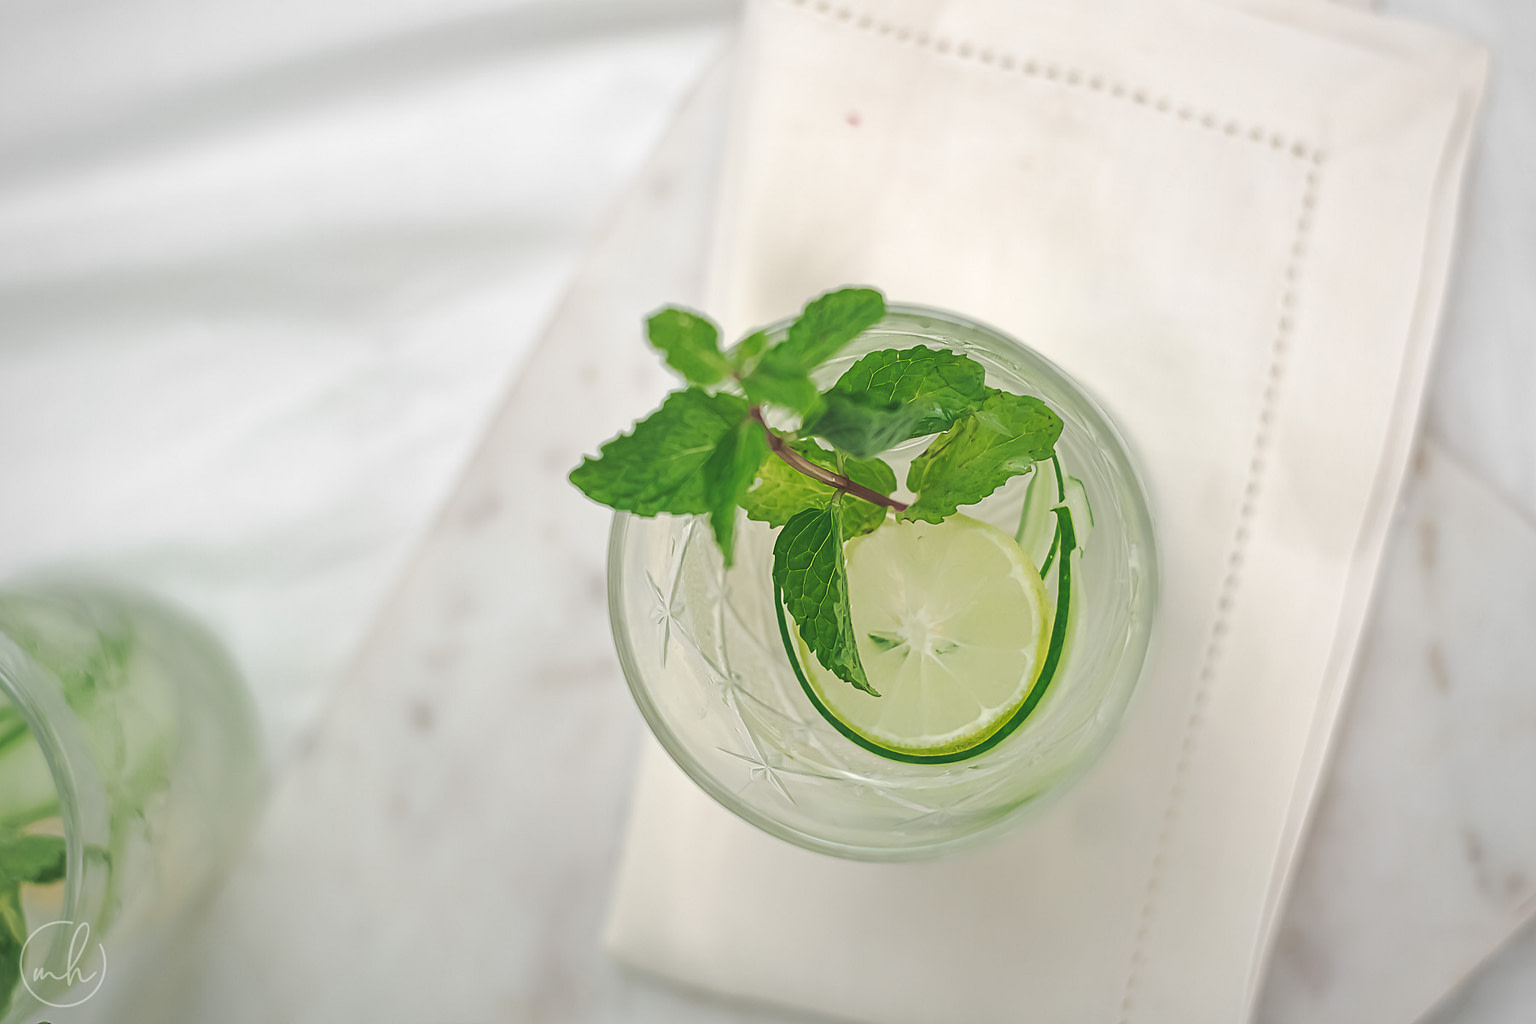 Focused, top view of a sliced lemon and cucumber peels, with the glass of cucumber basil lemonade in a blur.